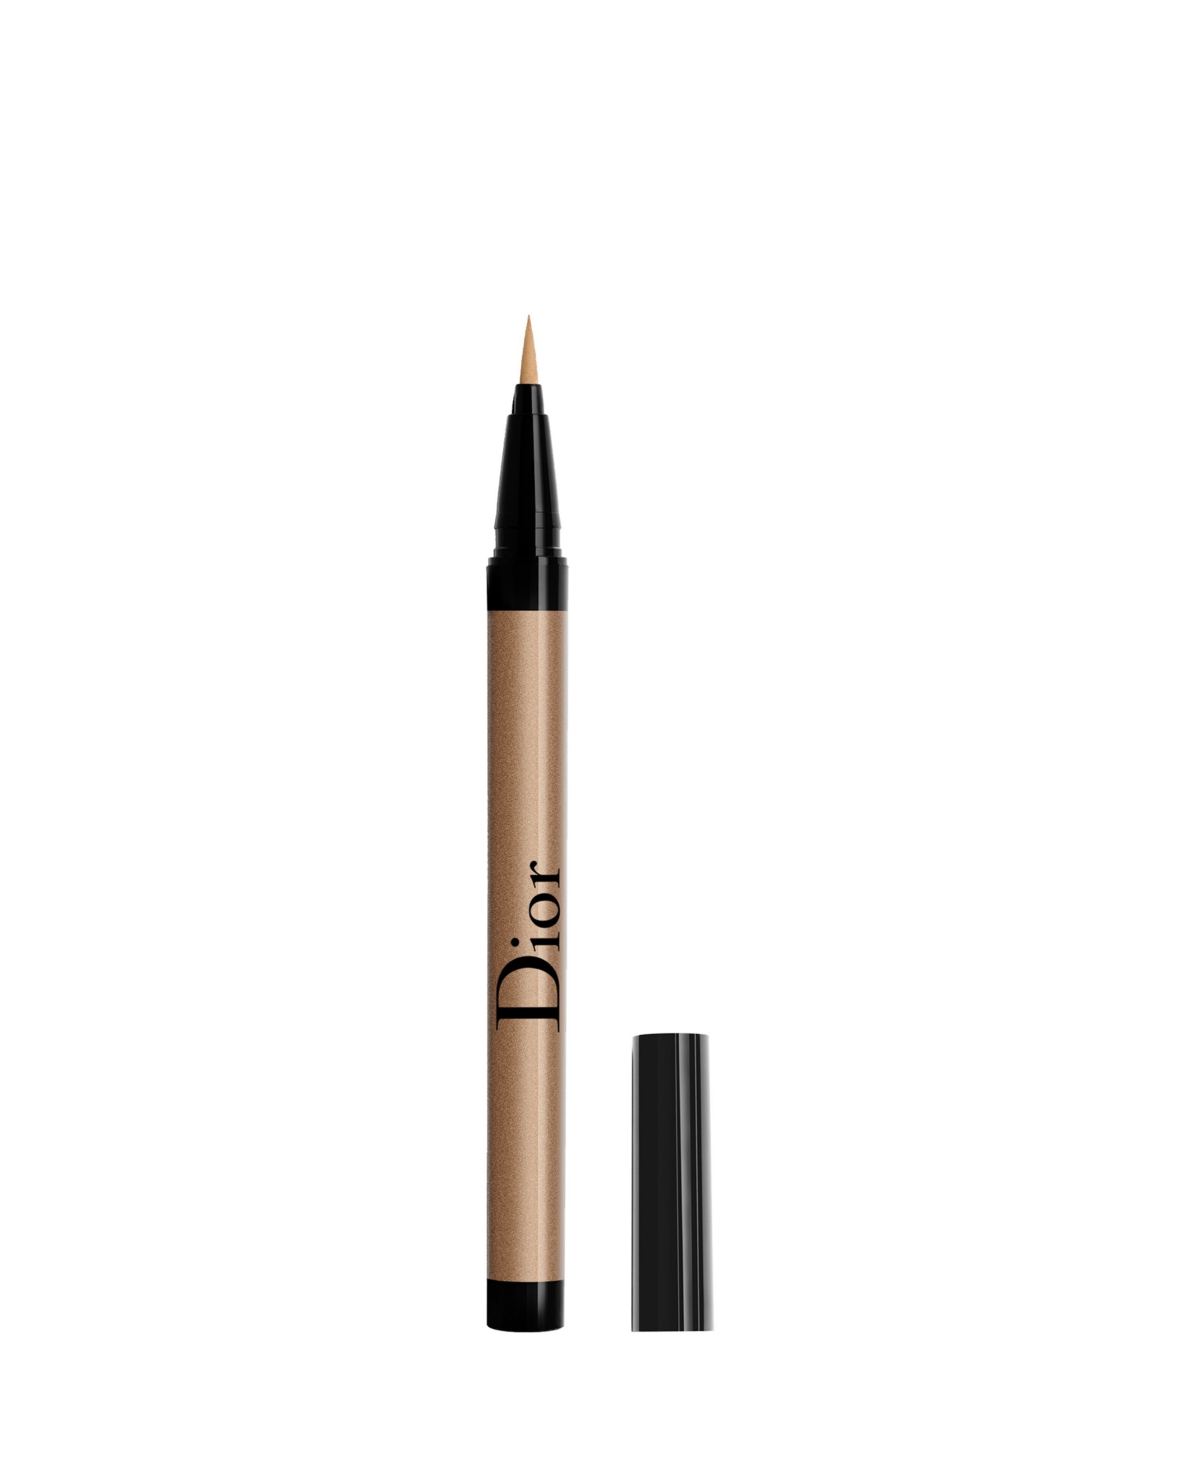 Dior Show On Stage Waterproof Liquid Eyeliner In Pearly Bronze (a Pearly Bronze)